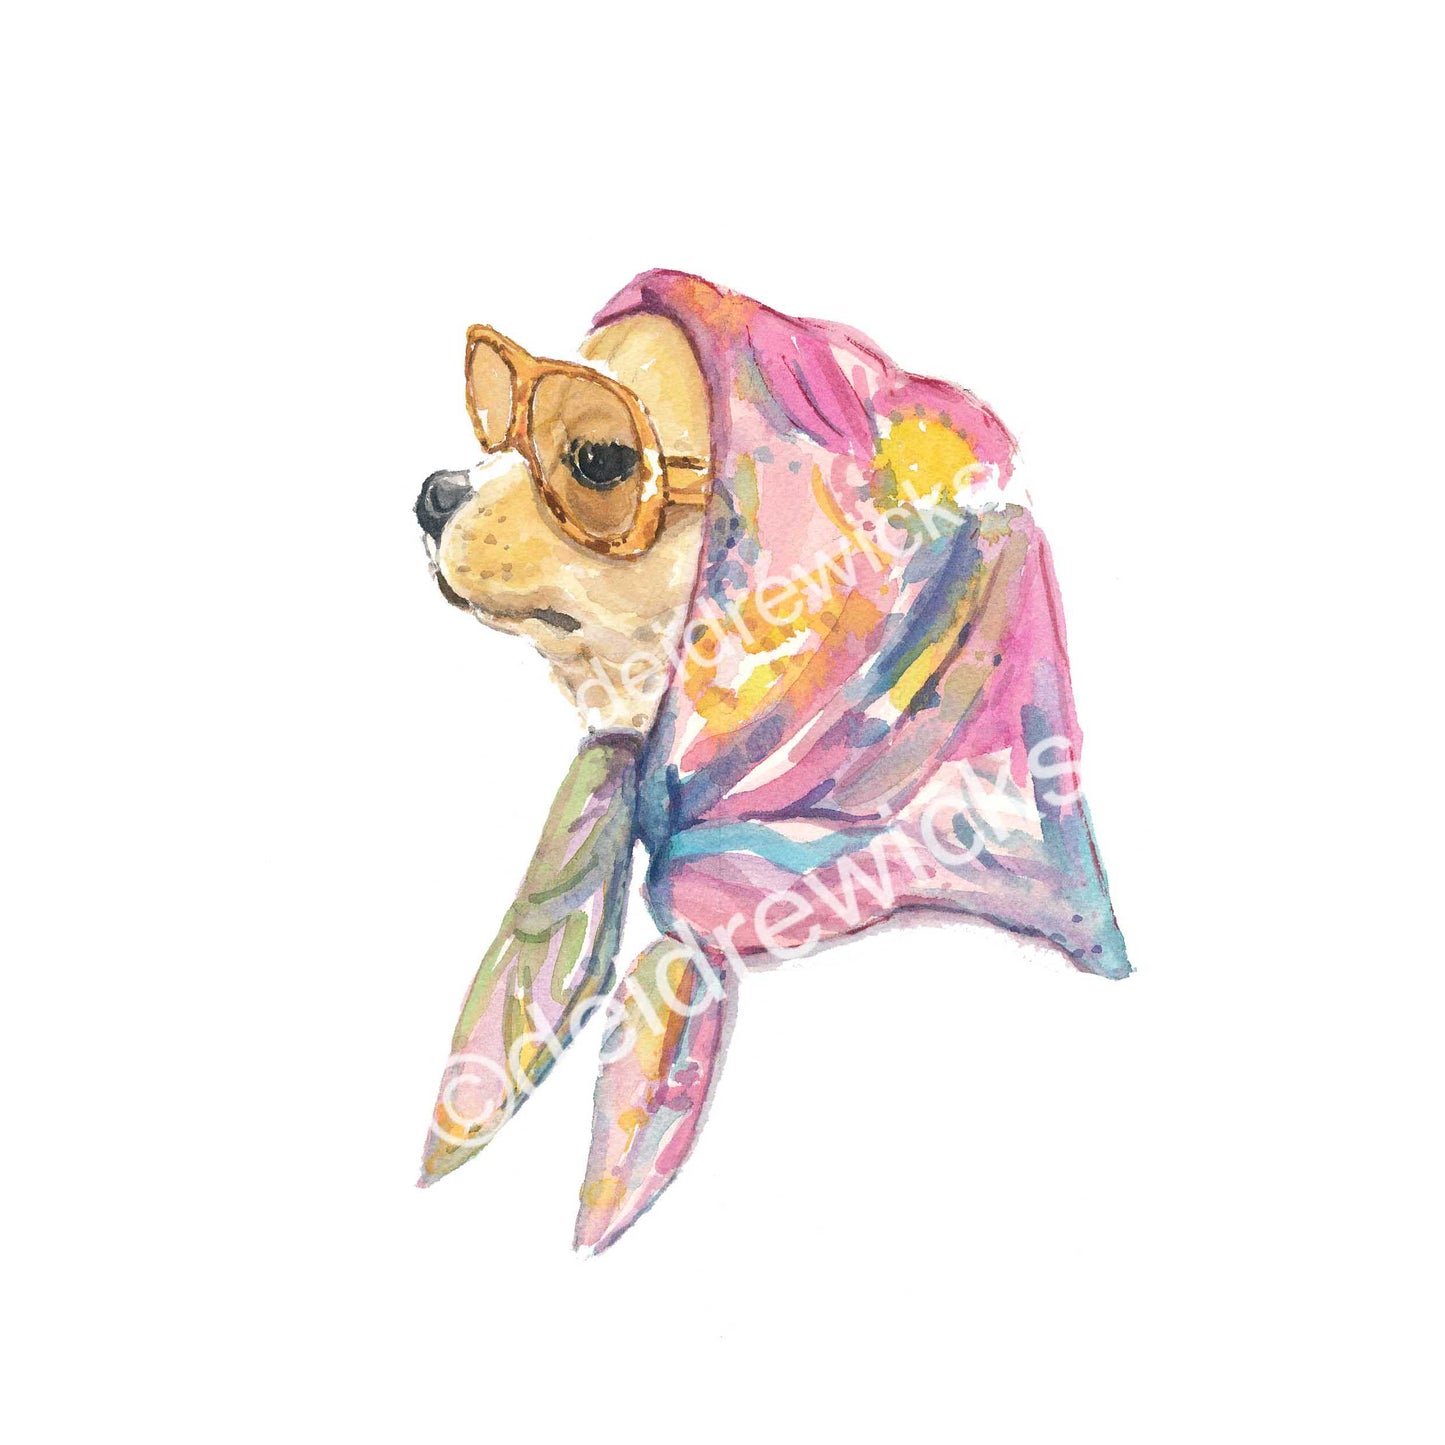 Watercolor painting print of a chic vintage style chihuahua dog